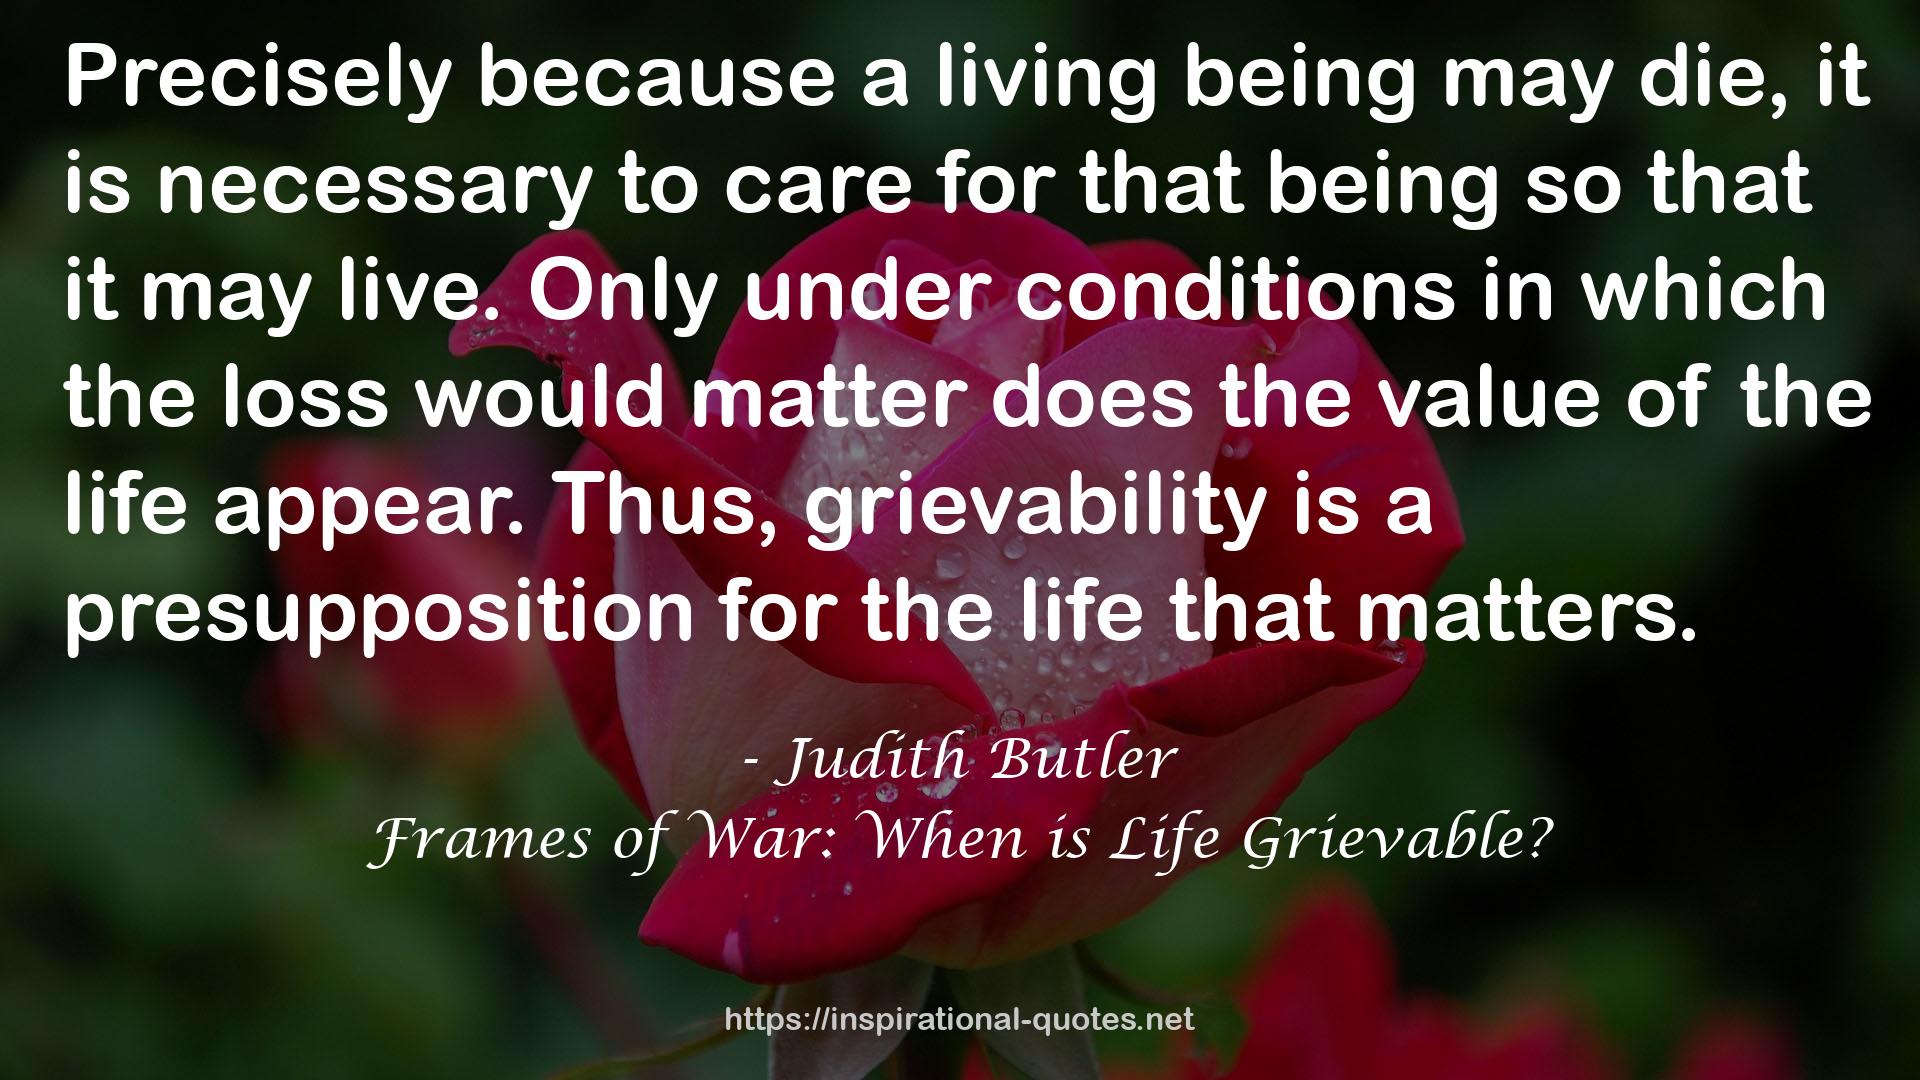 Frames of War: When is Life Grievable? QUOTES